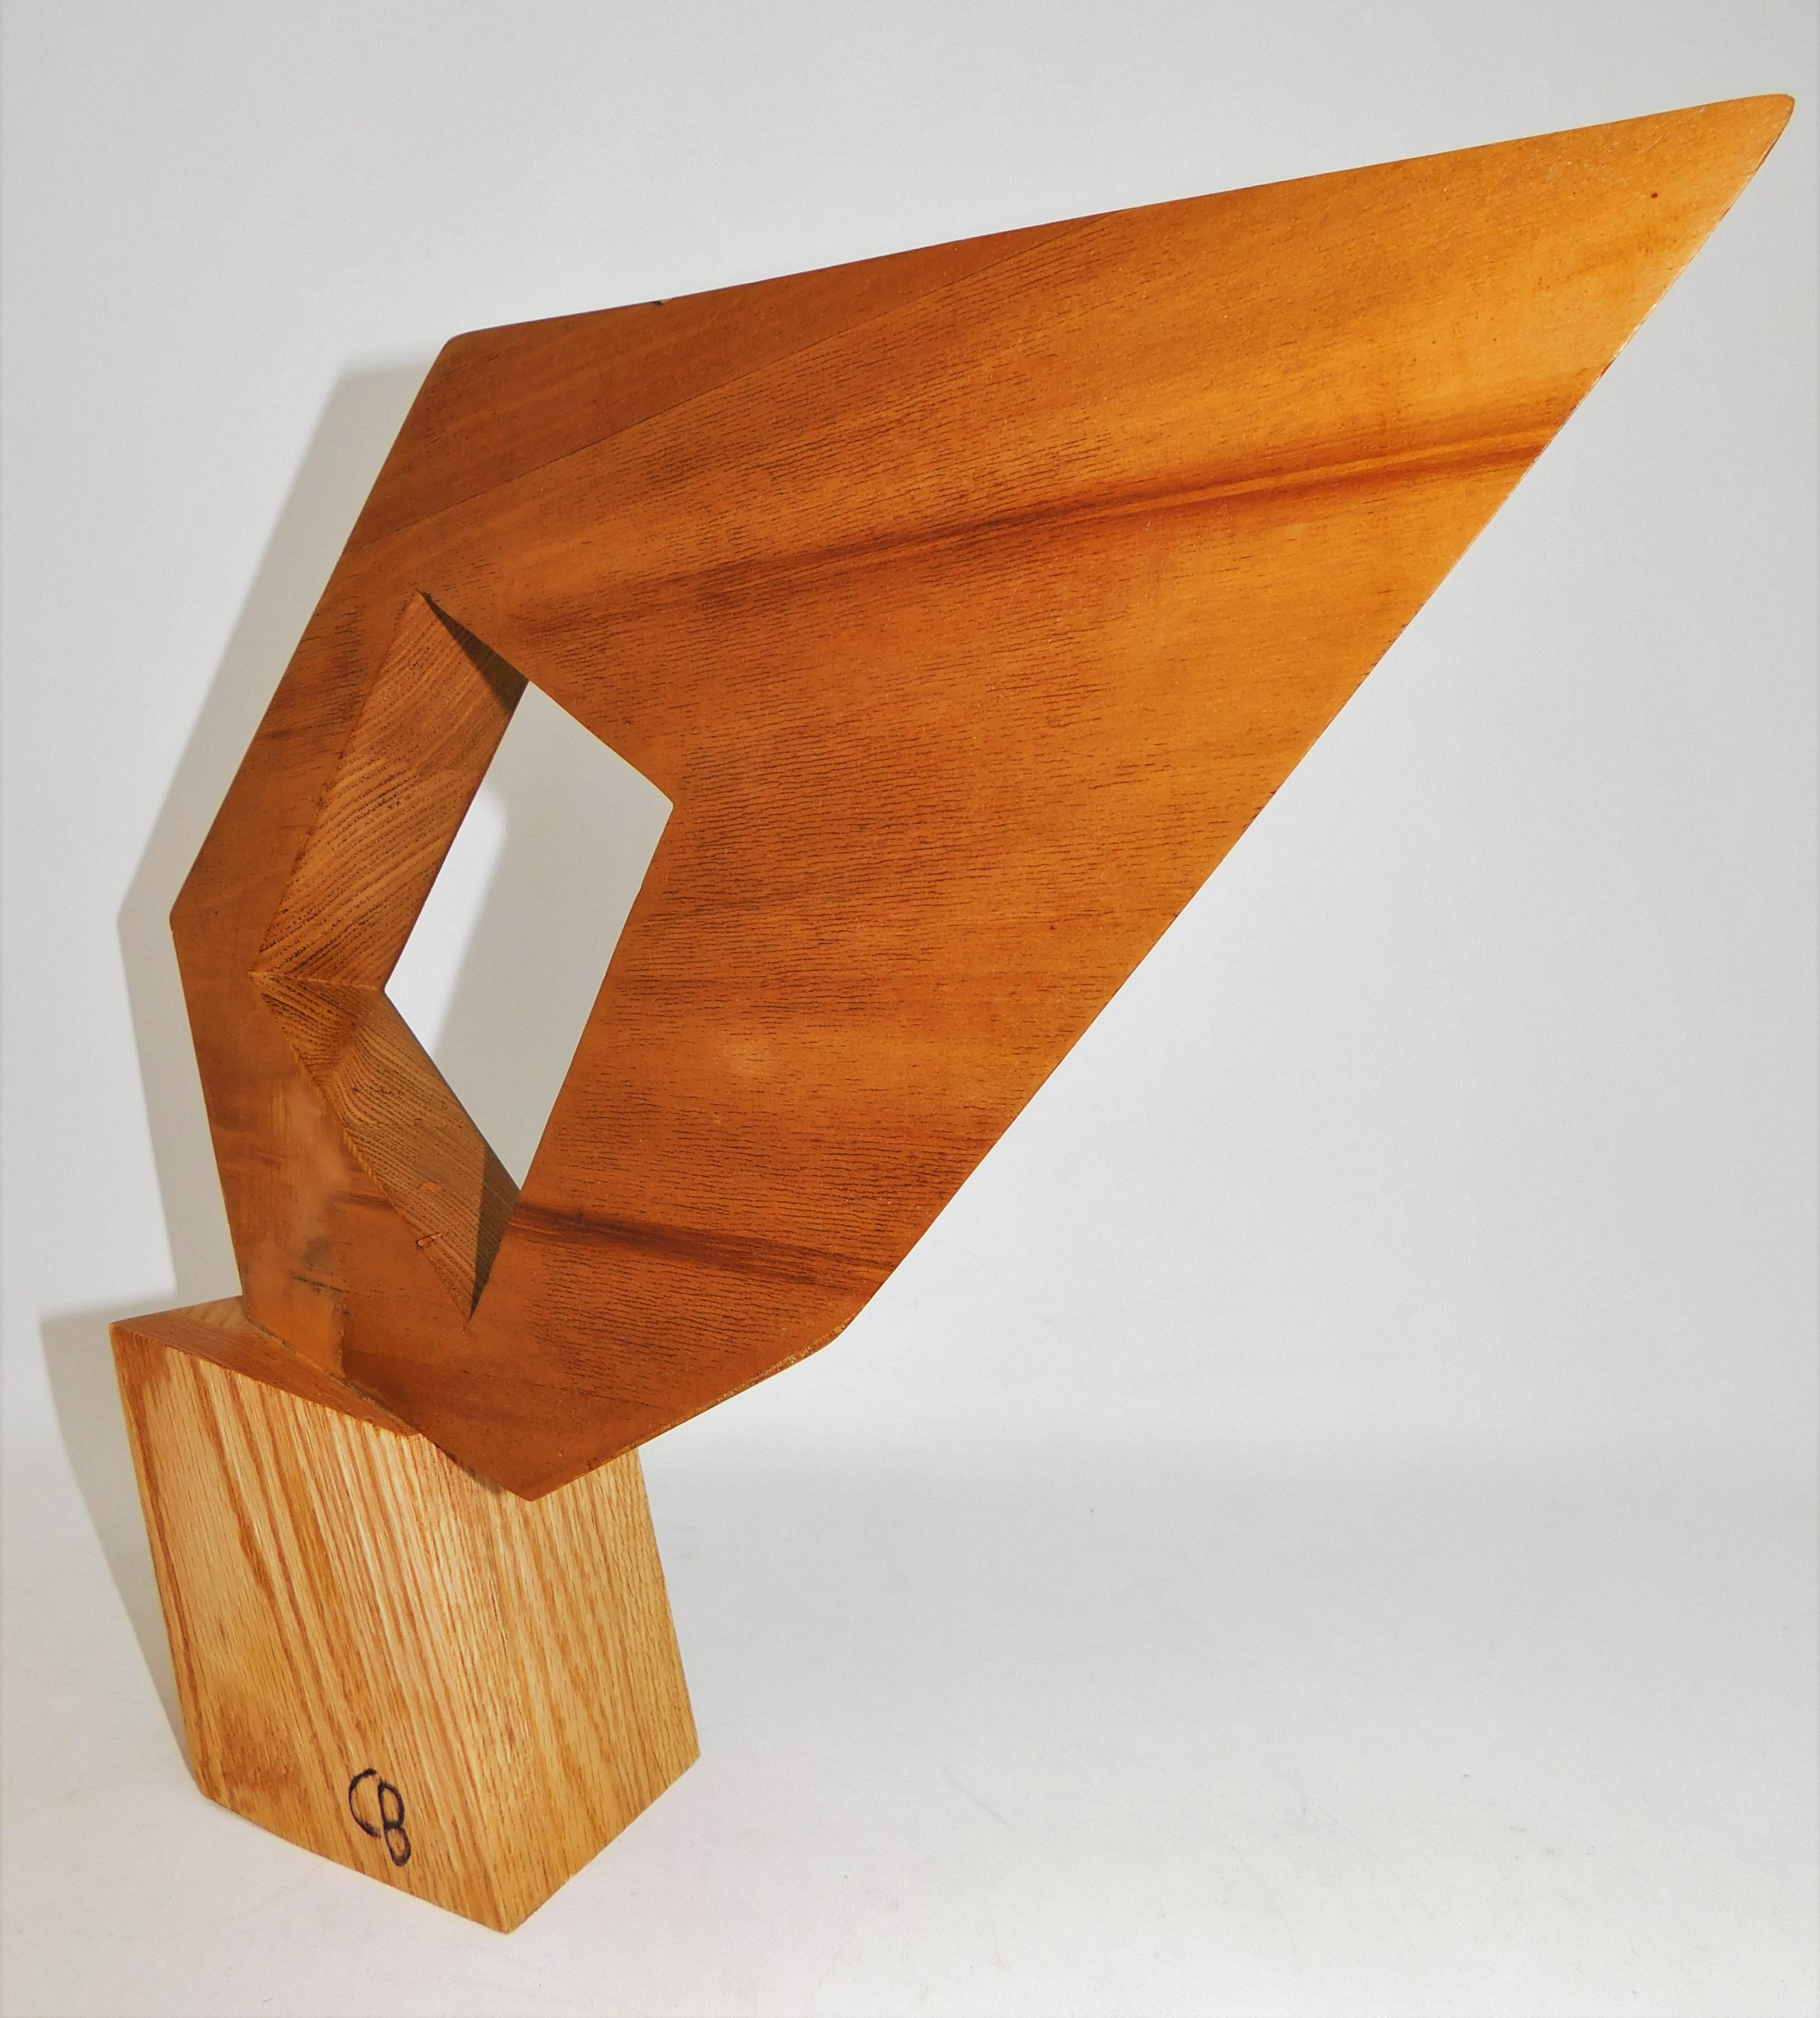 Signed Modern Abstract Constructivist Styled Wooden Oak Sculpture In Excellent Condition For Sale In Hamilton, Ontario